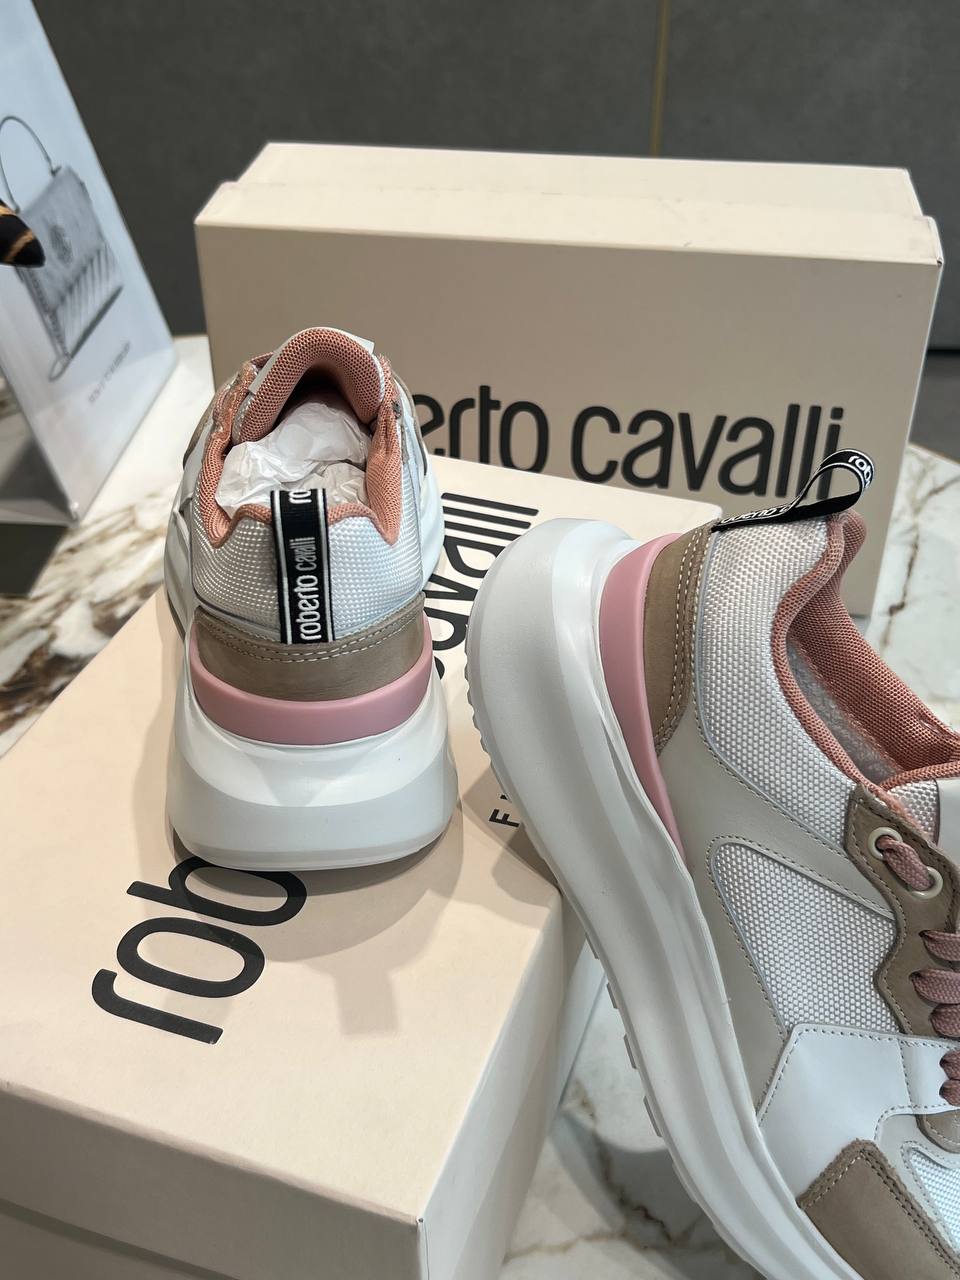 Roberto Cavalli Outlets 5094